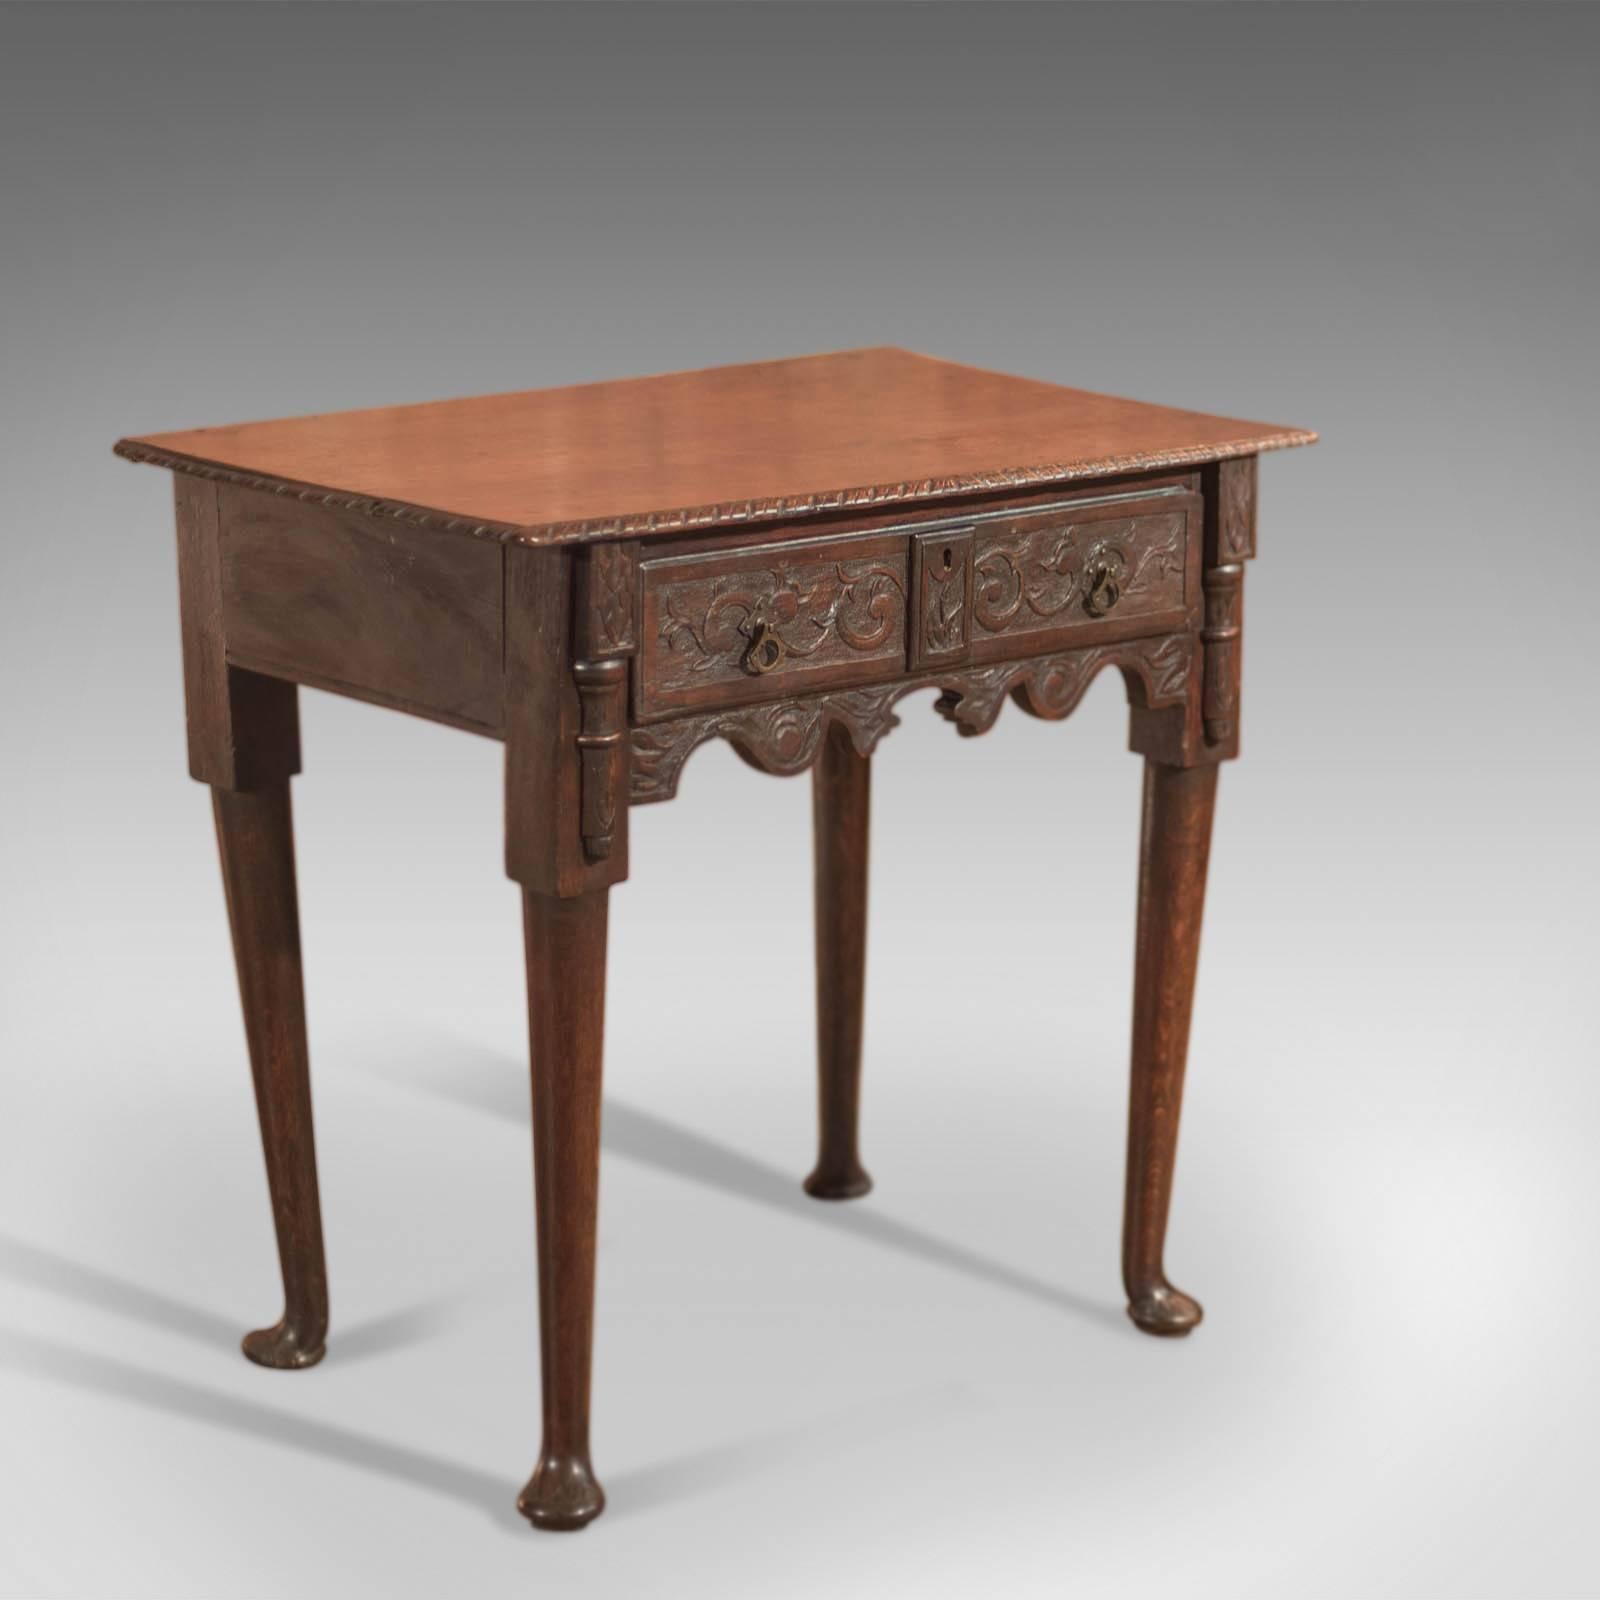 This is an antique, 18th century, Provincial side table, circa 1750.

Raised on slender, tapering, turned legs terminating in out-turned pad feet, the front feet are decorated with relief foliate carving.

The serpentine apron is heavily carved